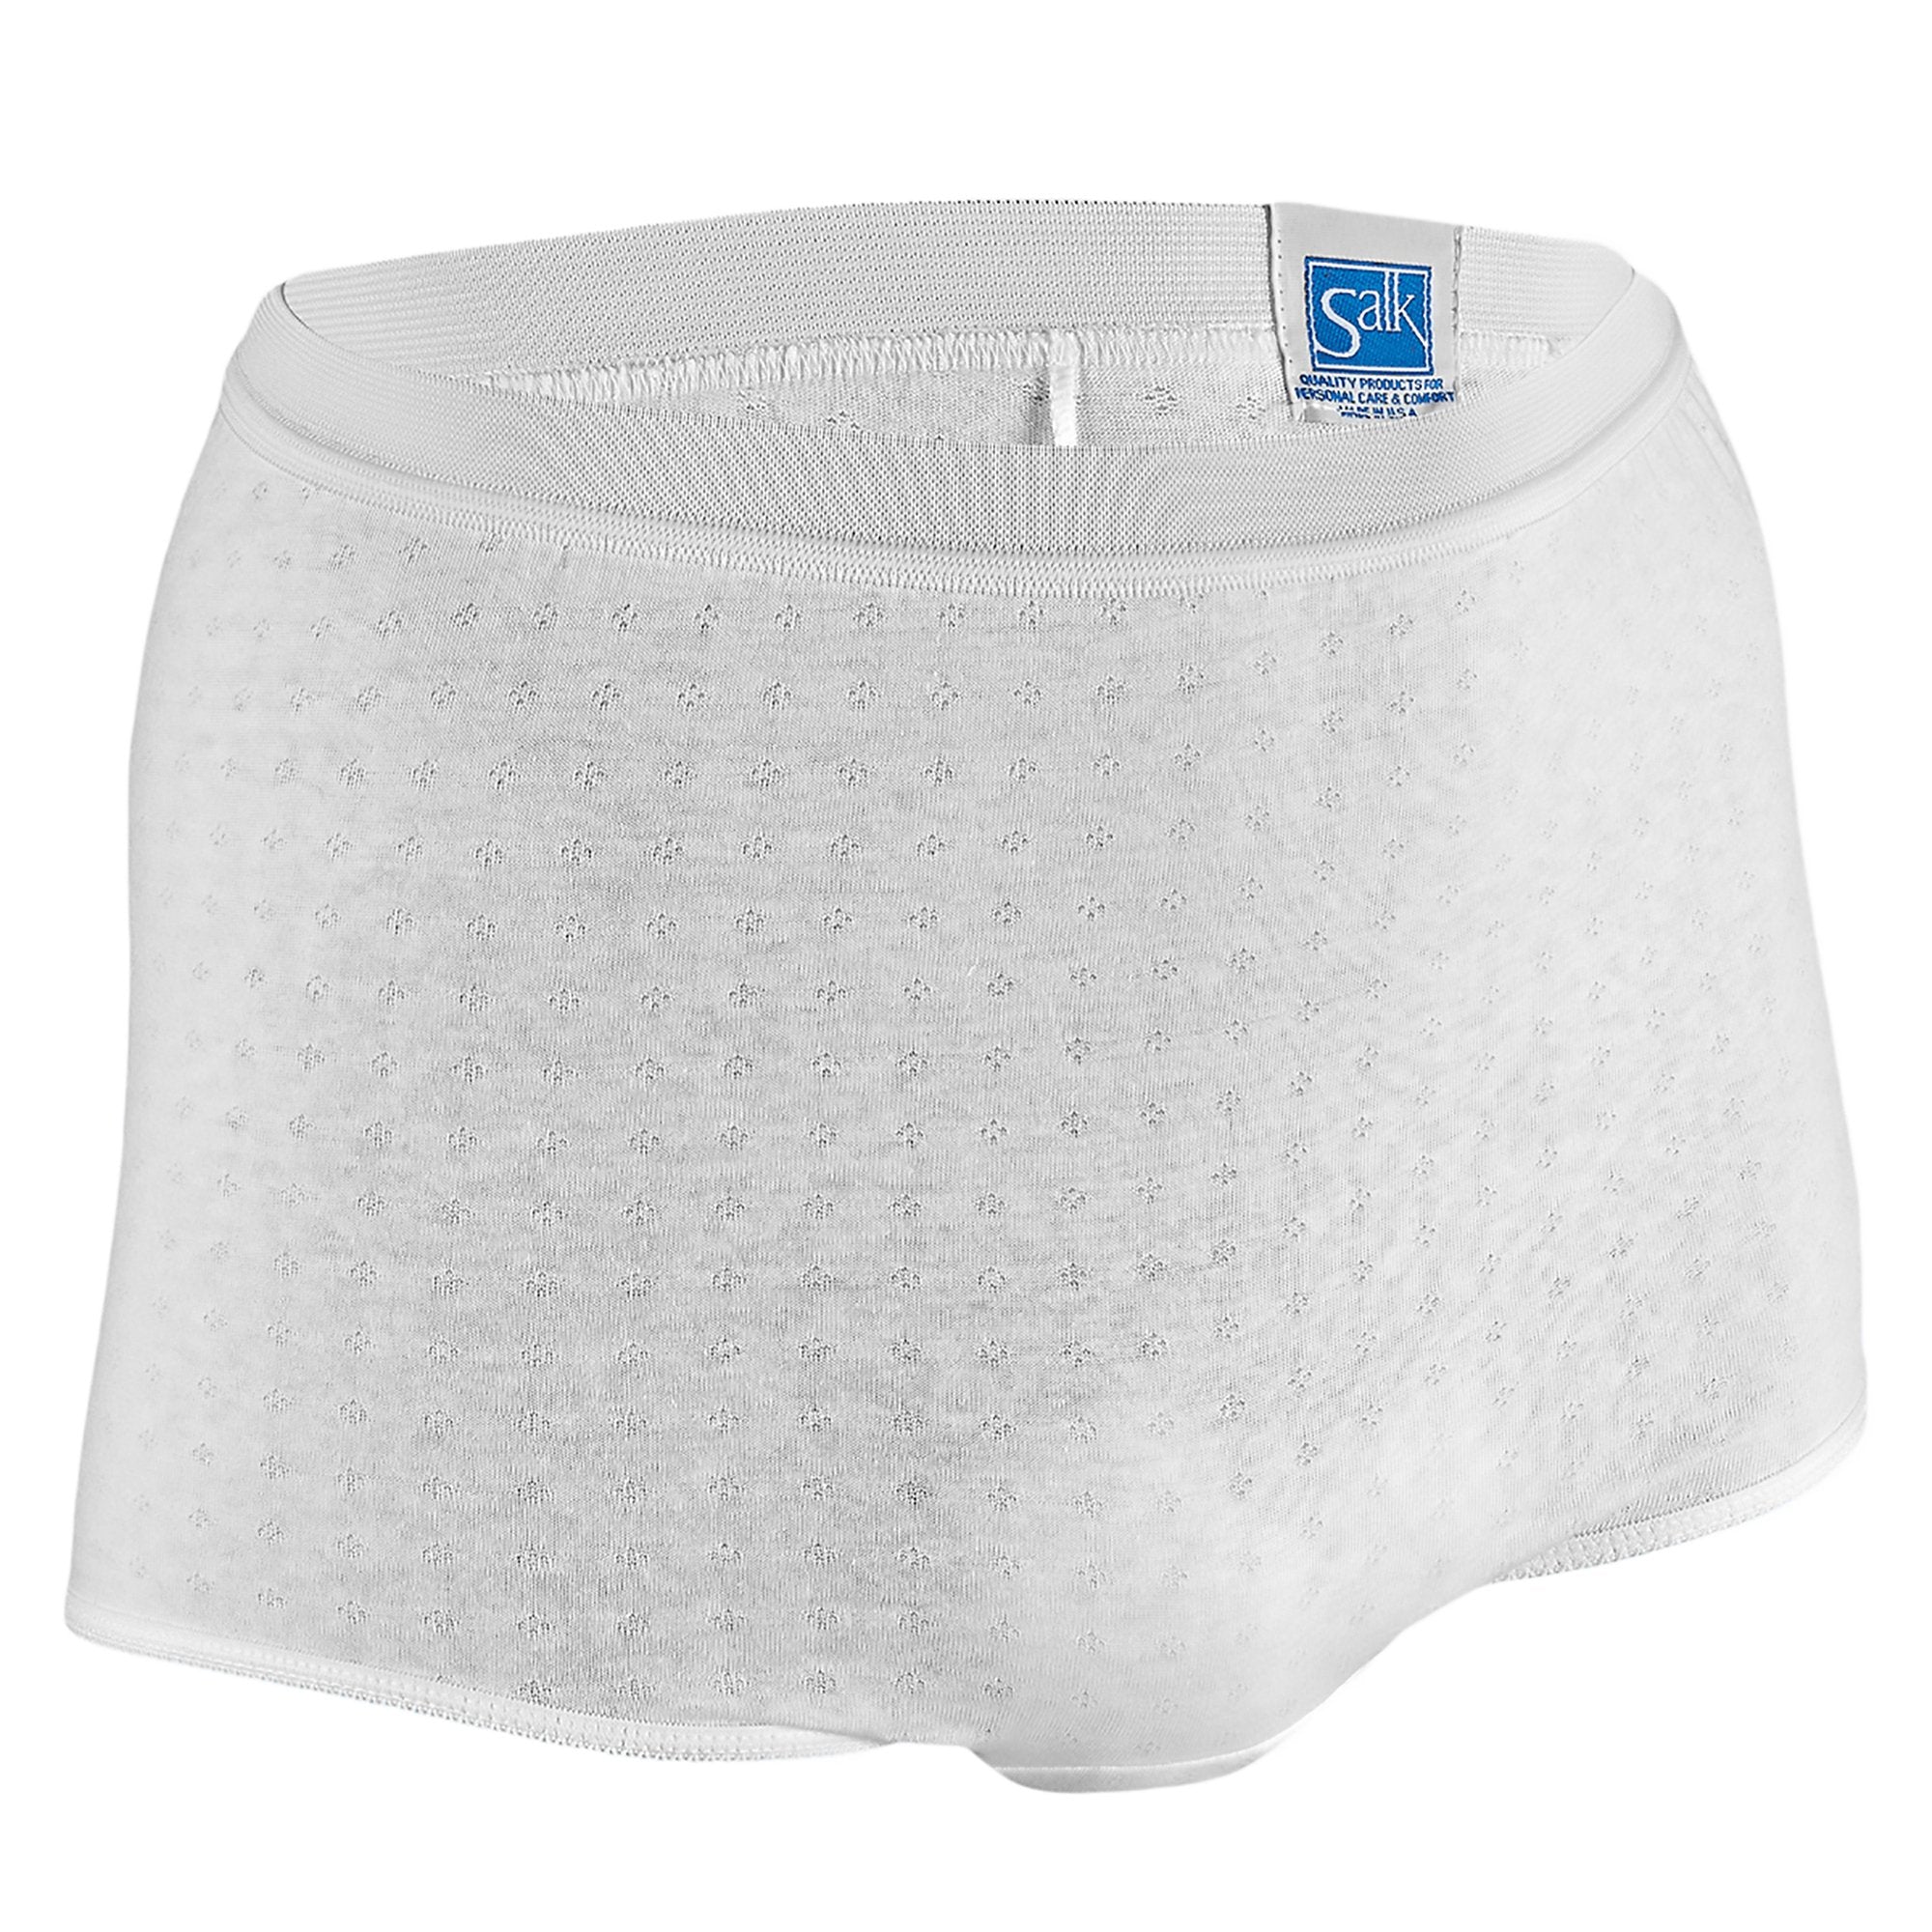 Female Adult Absorbent Underwear Light & Dry™ Pull On X-Large Reusable Light Absorbency